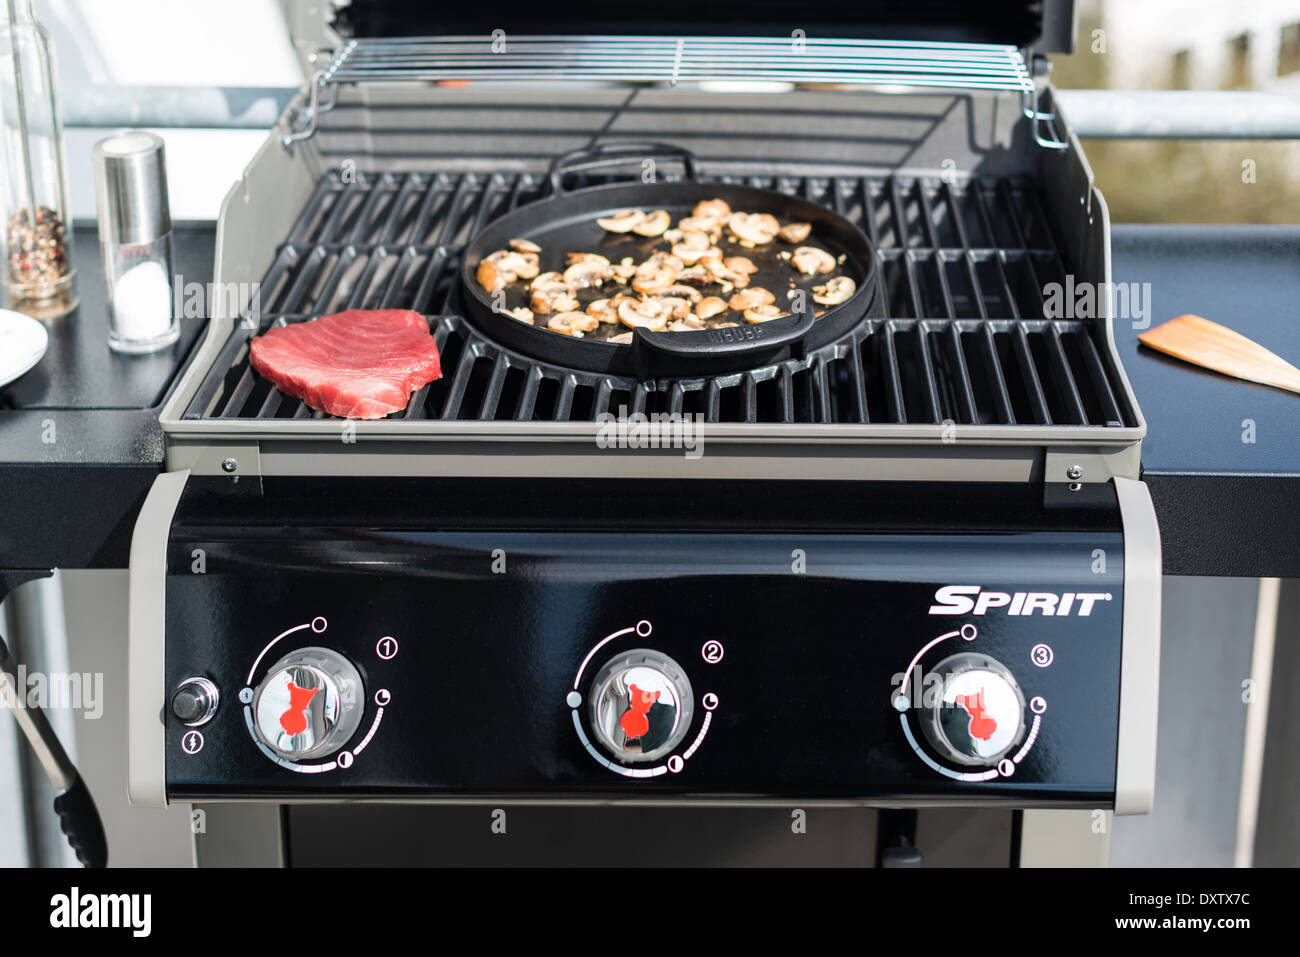 Gas Grill High Resolution Stock Photography and Images - Alamy